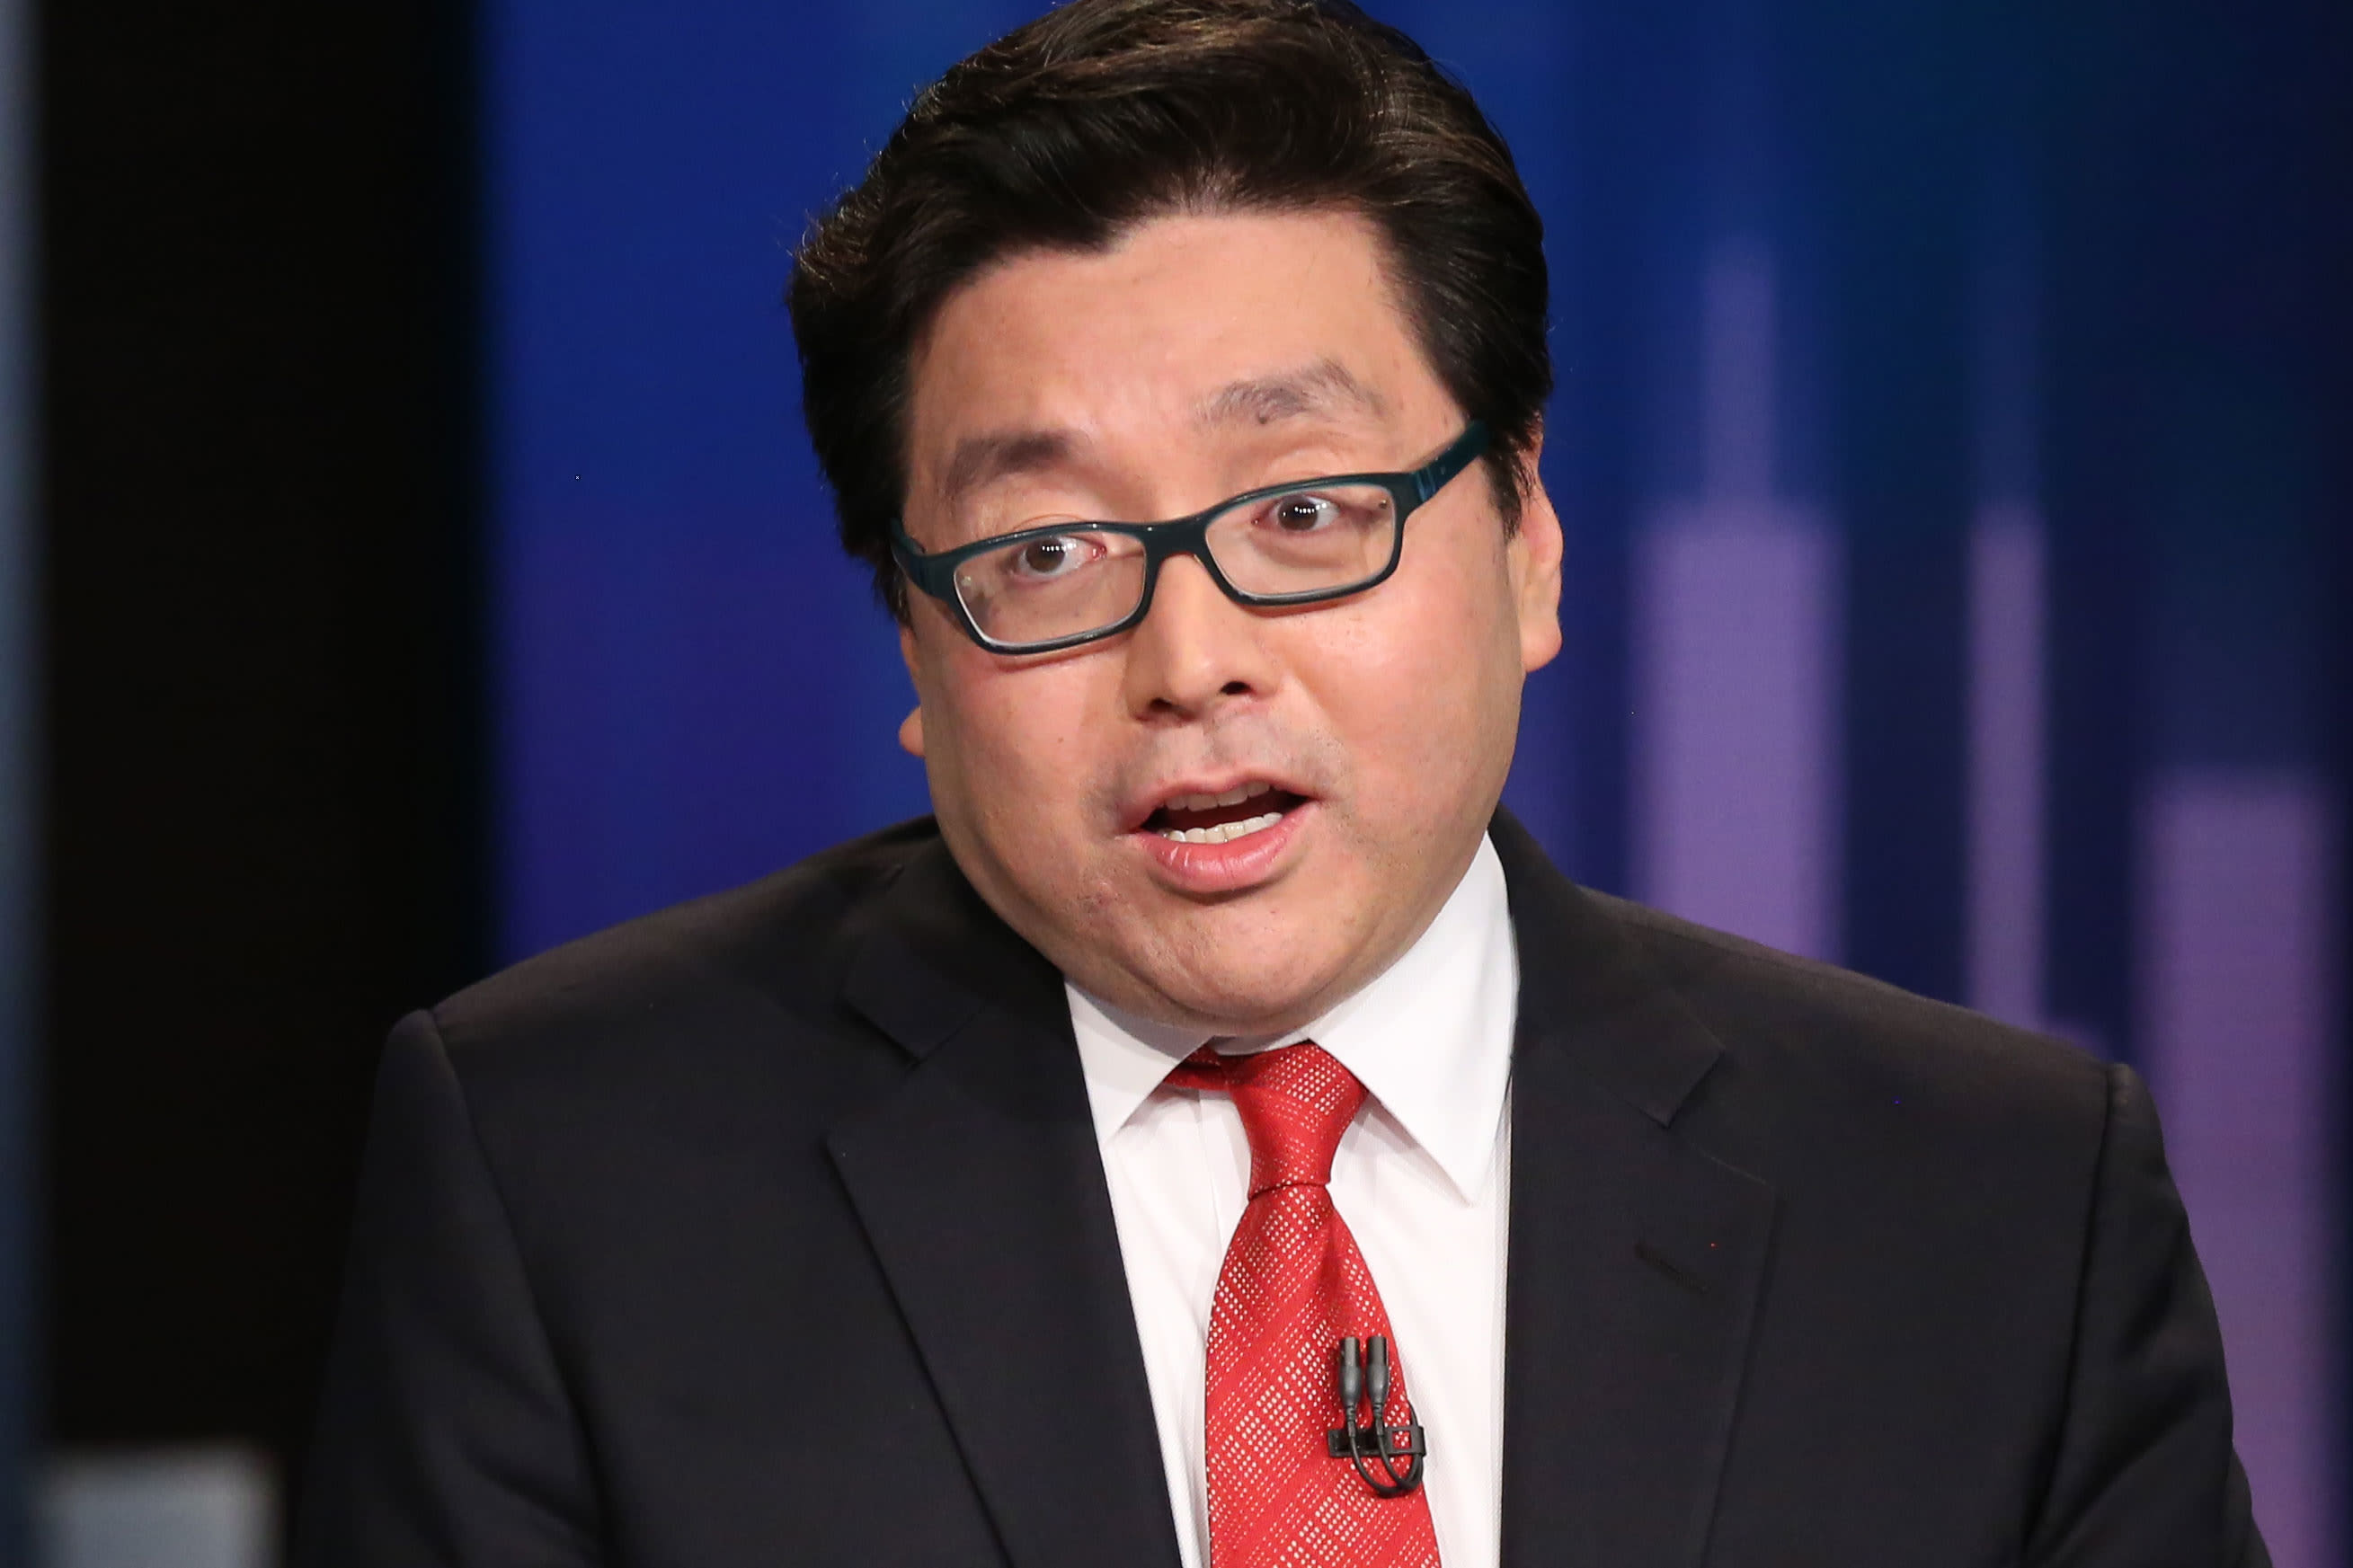 Fundstrat’s Tom Lee is expecting a “battle rally” in April